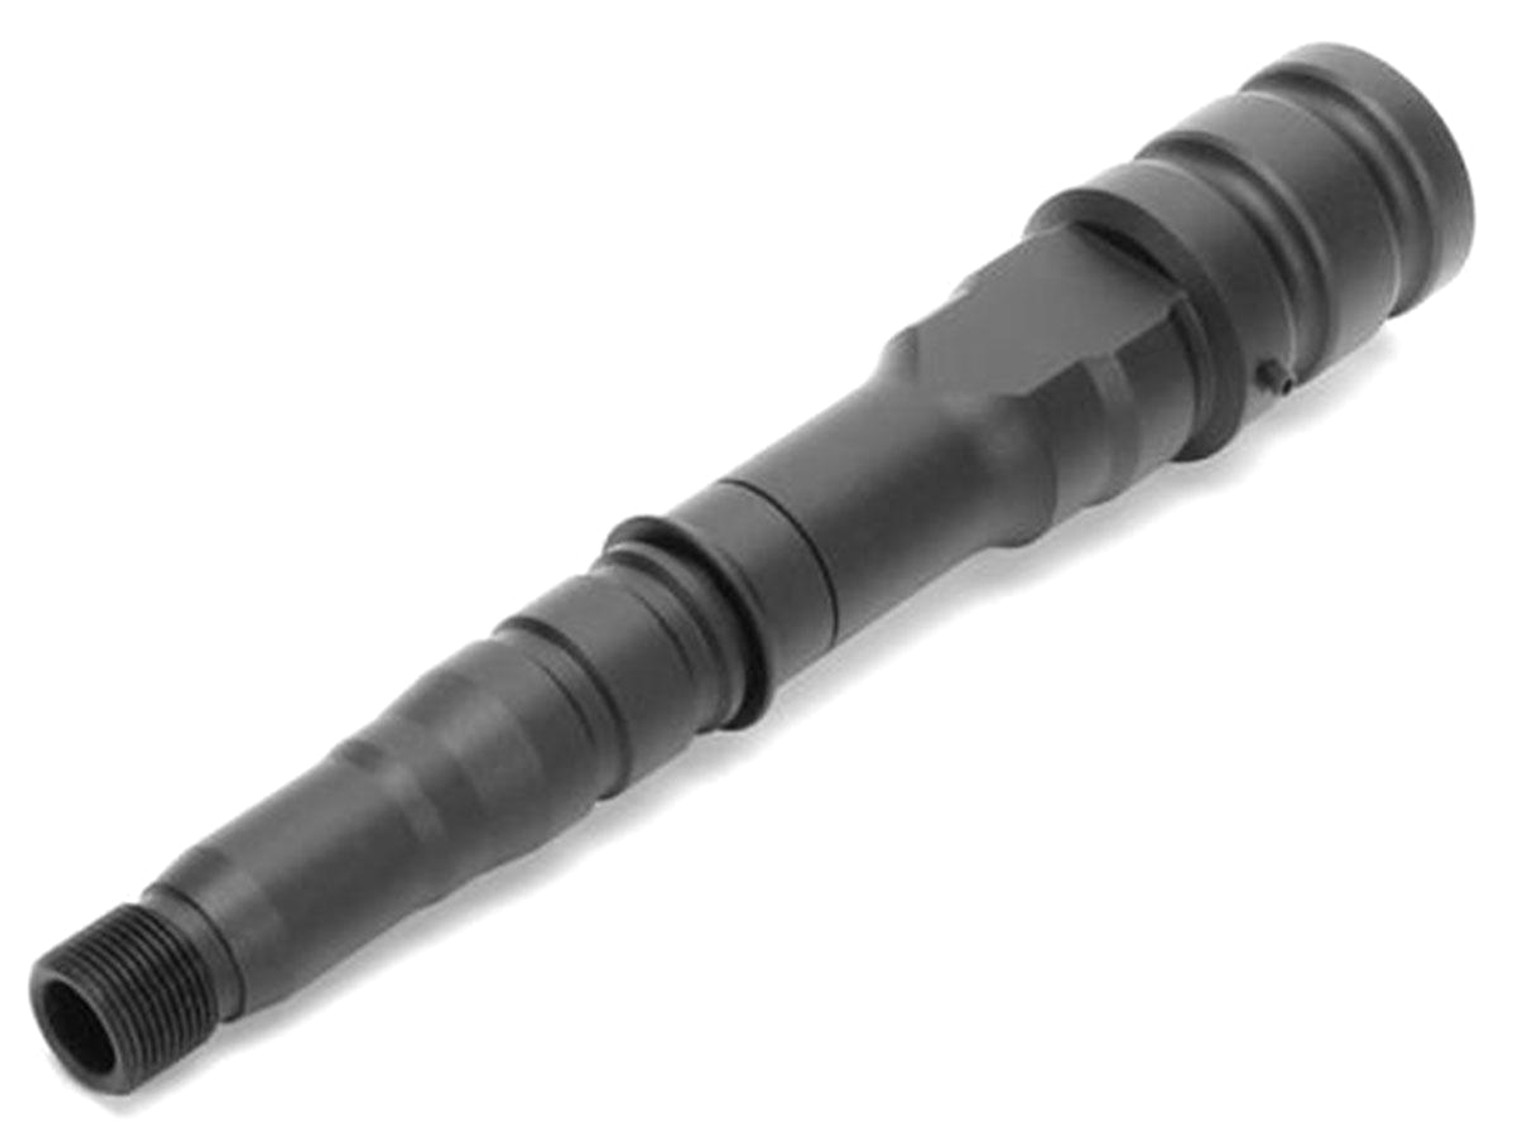 Laylax / First Factory Adjustable Outer Barrel Set for Sig Sauer ProForce MCX Virtus Airsoft AEG Rifle